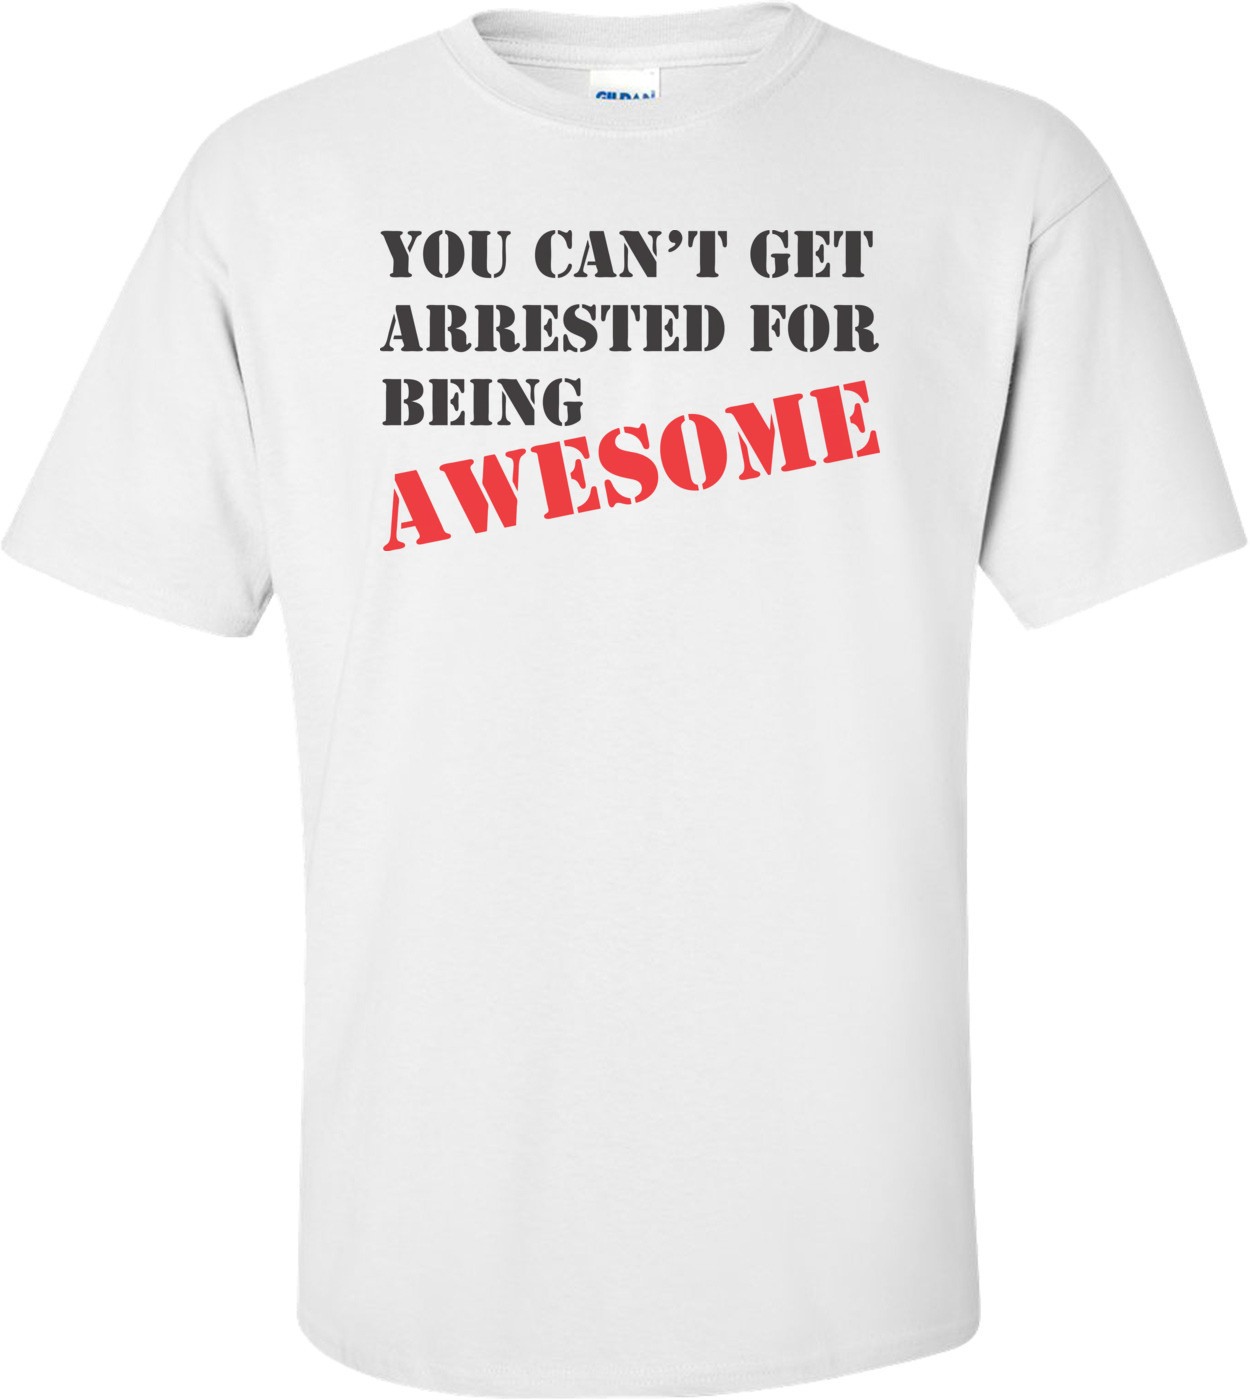 You Can't Get Arrested For Being Awesome T-shirt